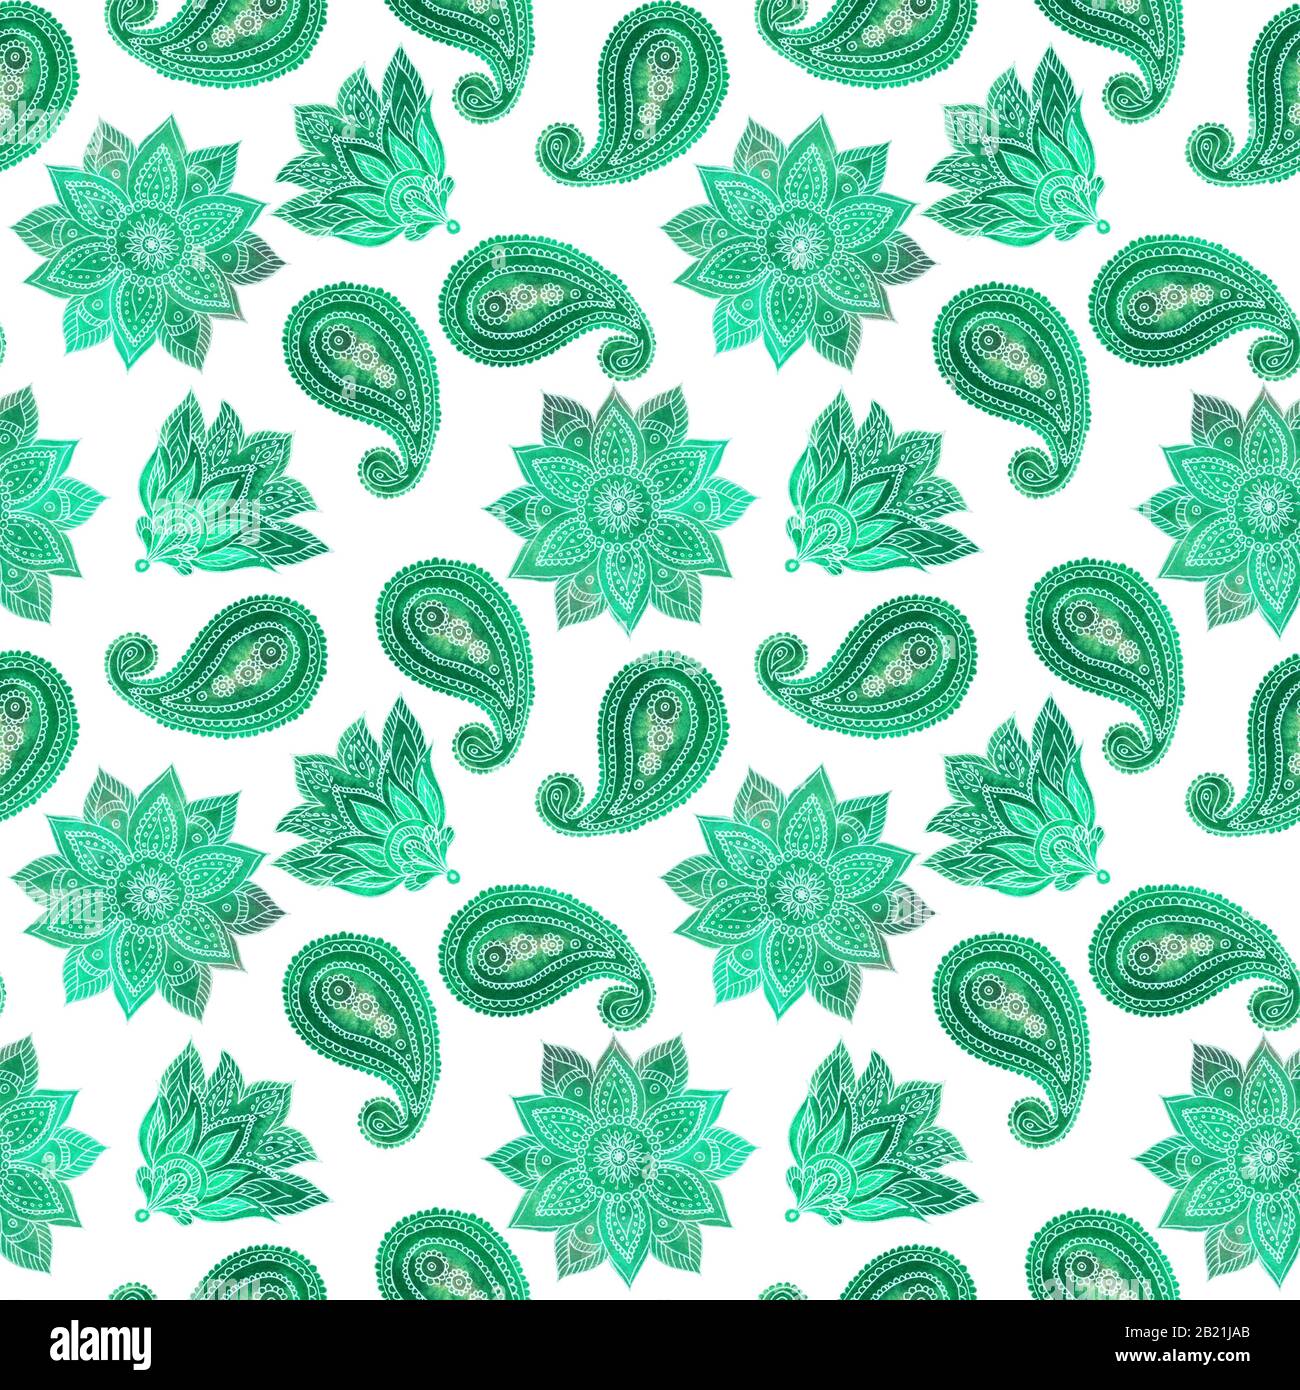 Seamless paisley style hand-drawn pattern. Watercolor elements. Green floral pattern. Stock Photo